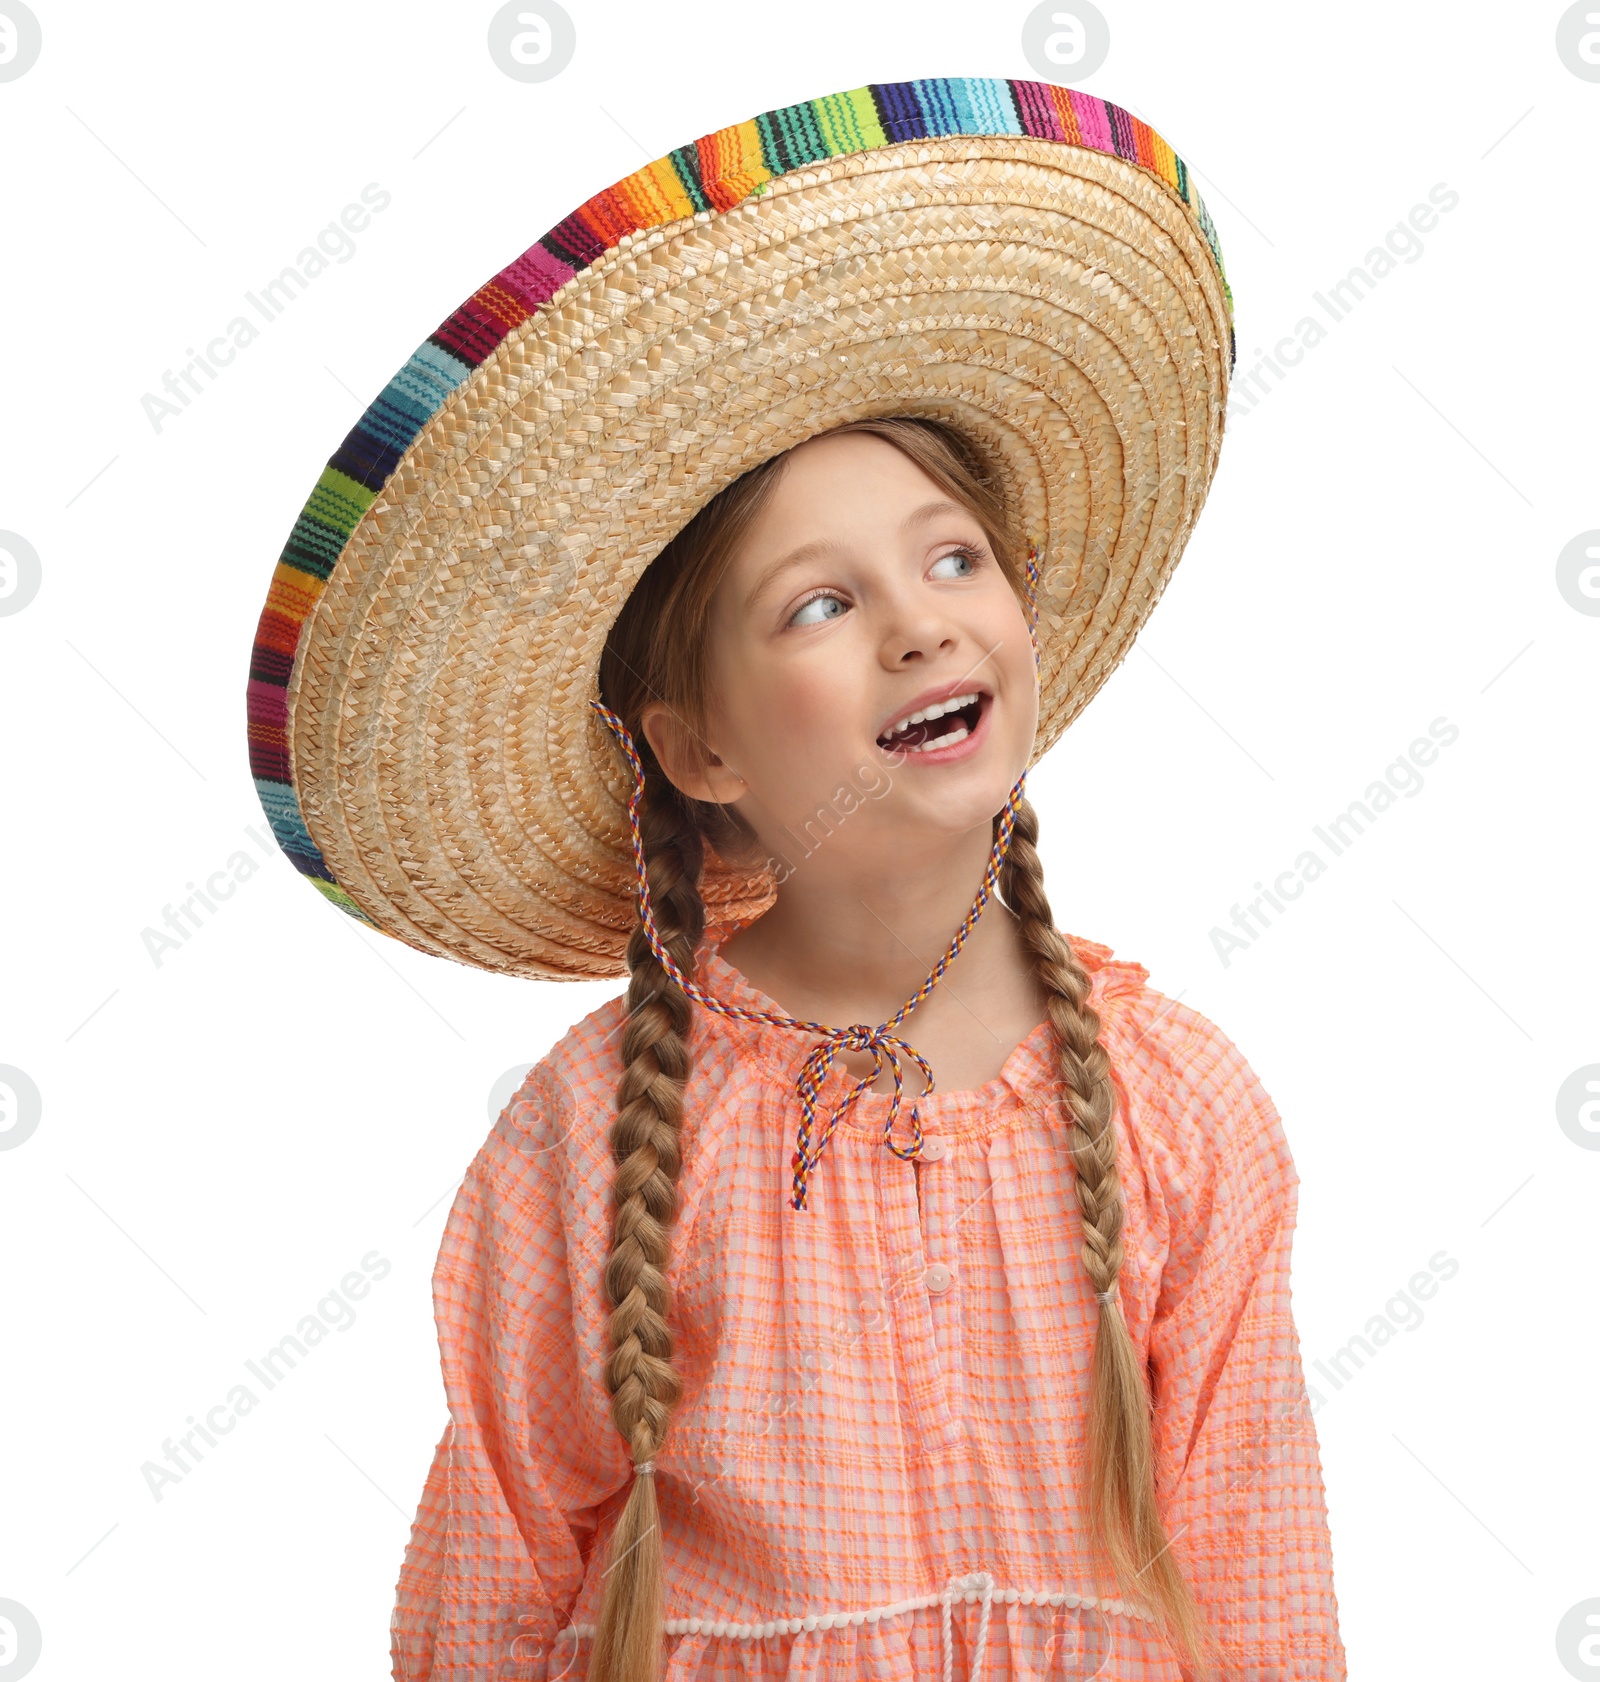 Photo of Cute girl in Mexican sombrero hat on white background